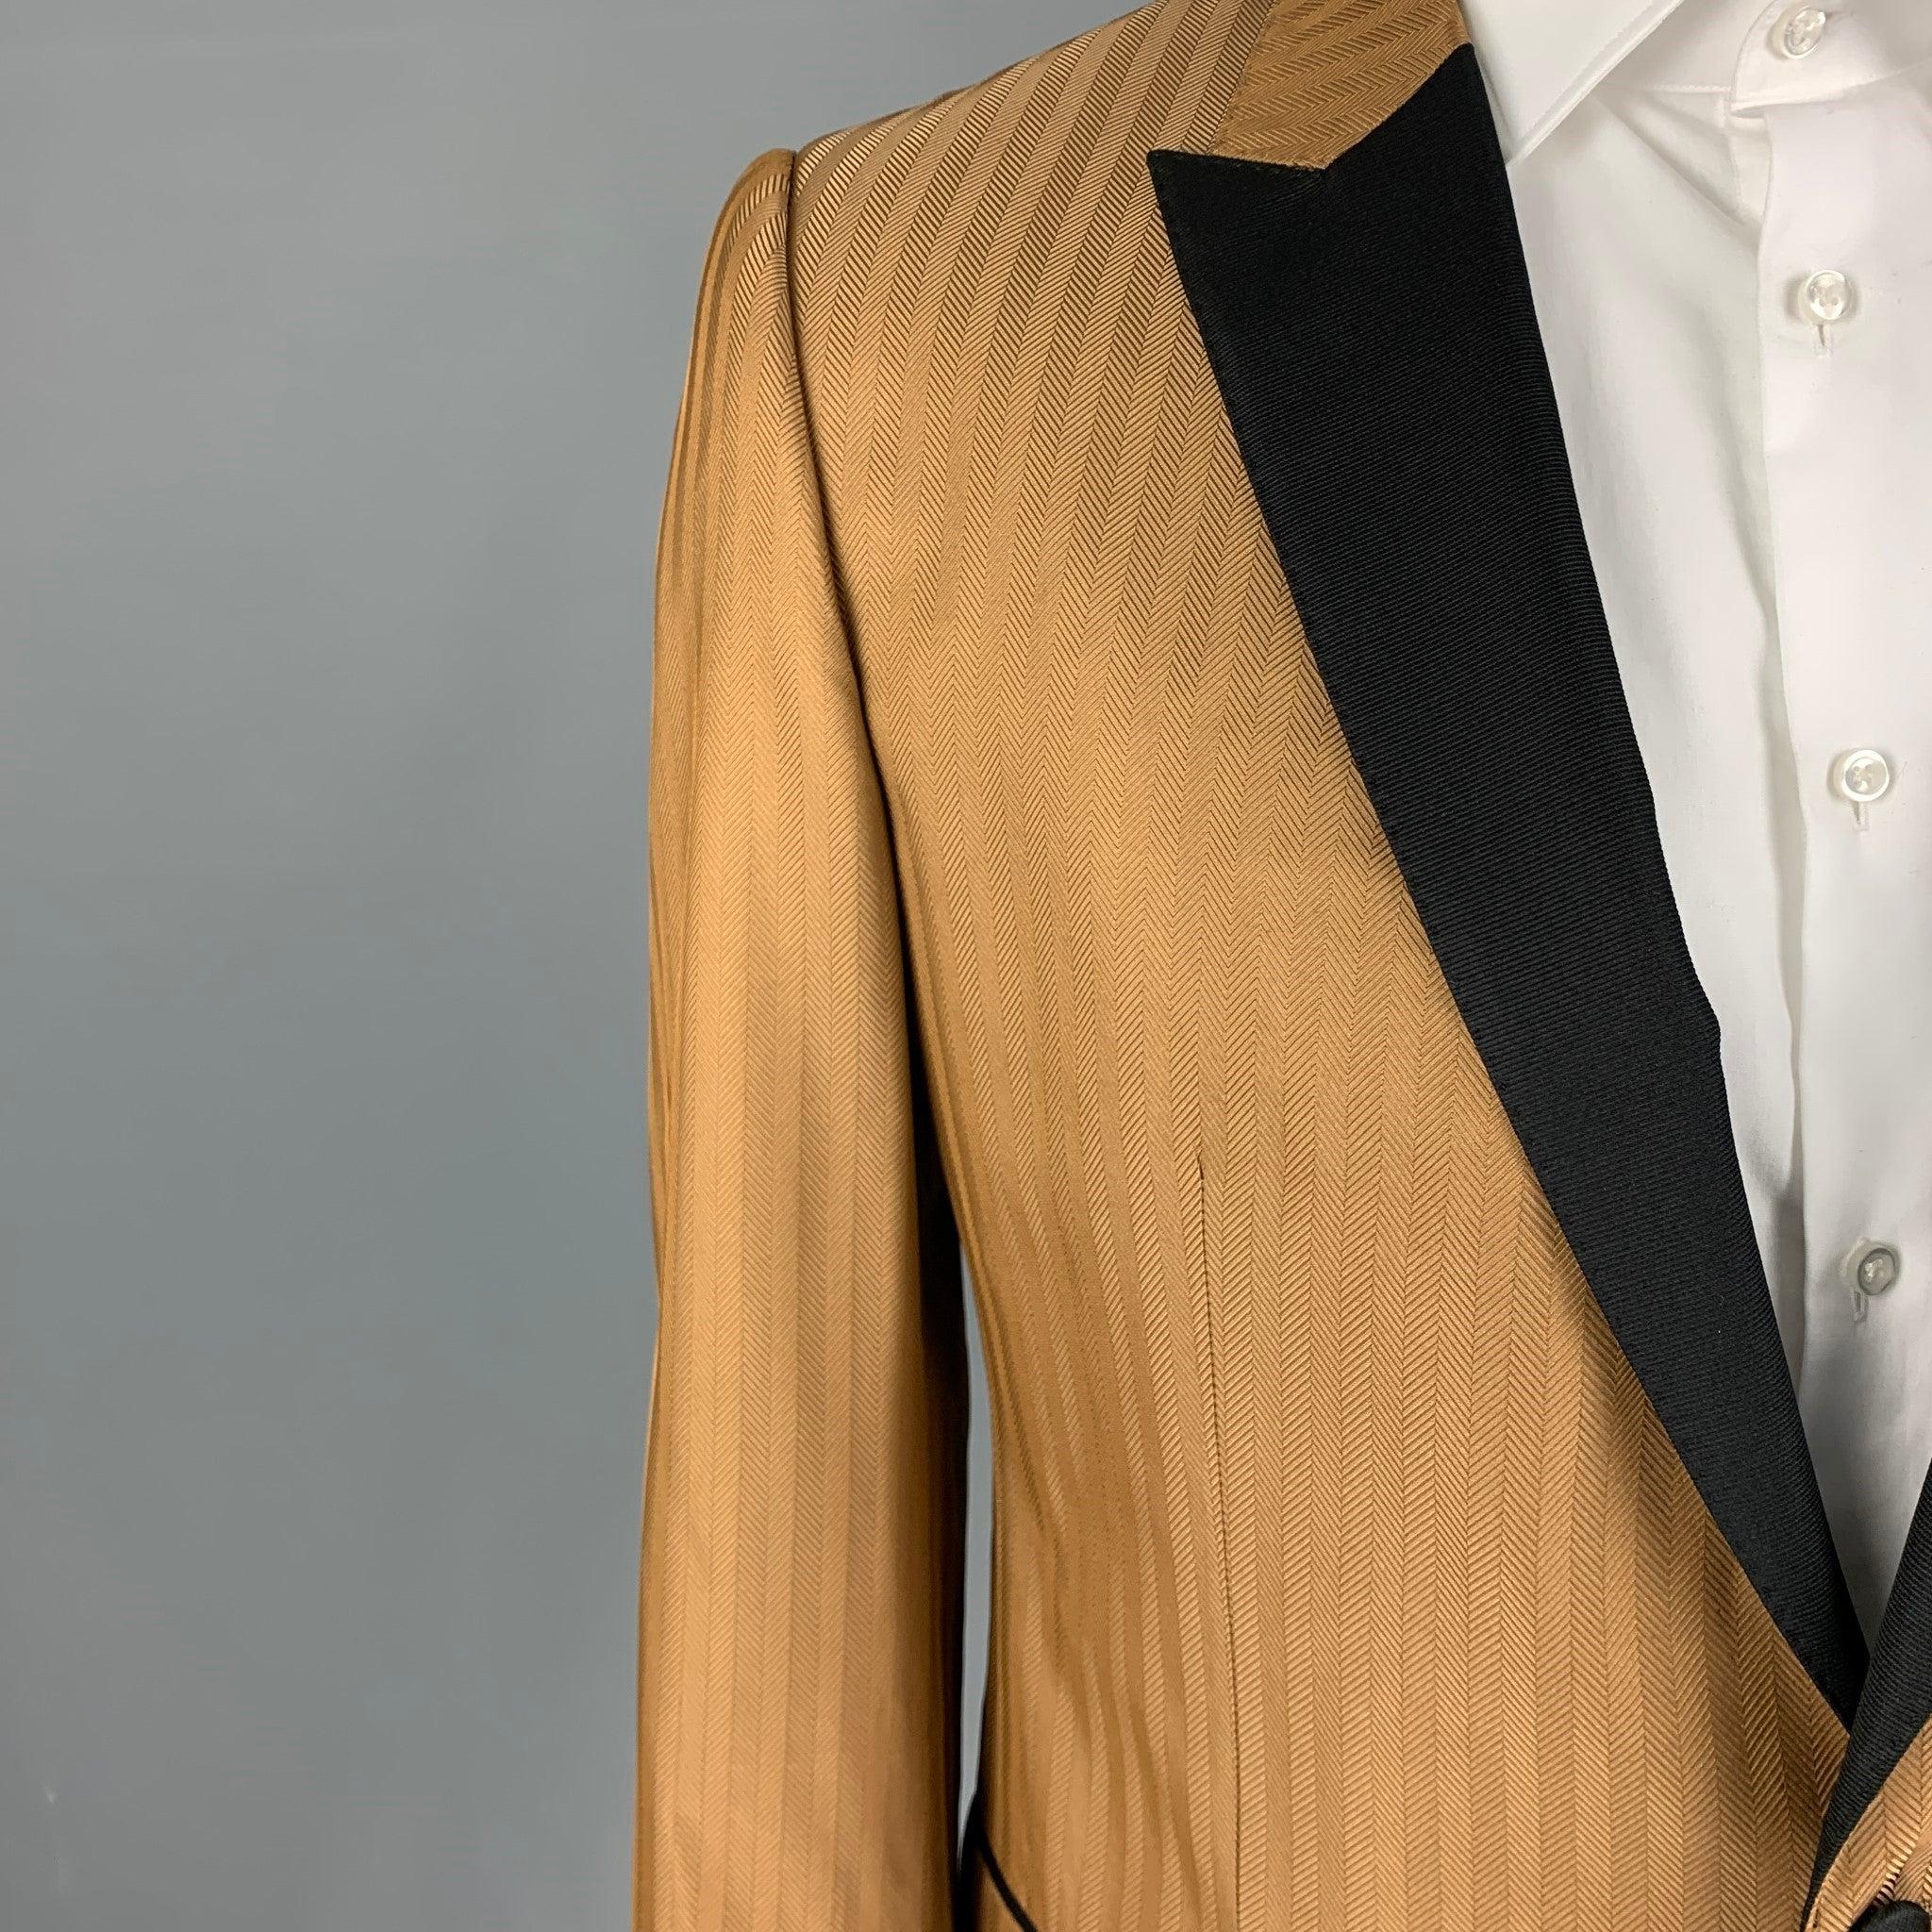 DOLCE & GABBANA sport coat comes in a tan herringbone silk blend with a full liner featuring a black peak lapel, flap pockets, single back vent, and a double button closure. Made in Italy.
Excellent
Pre-Owned Condition. 

Marked:   52